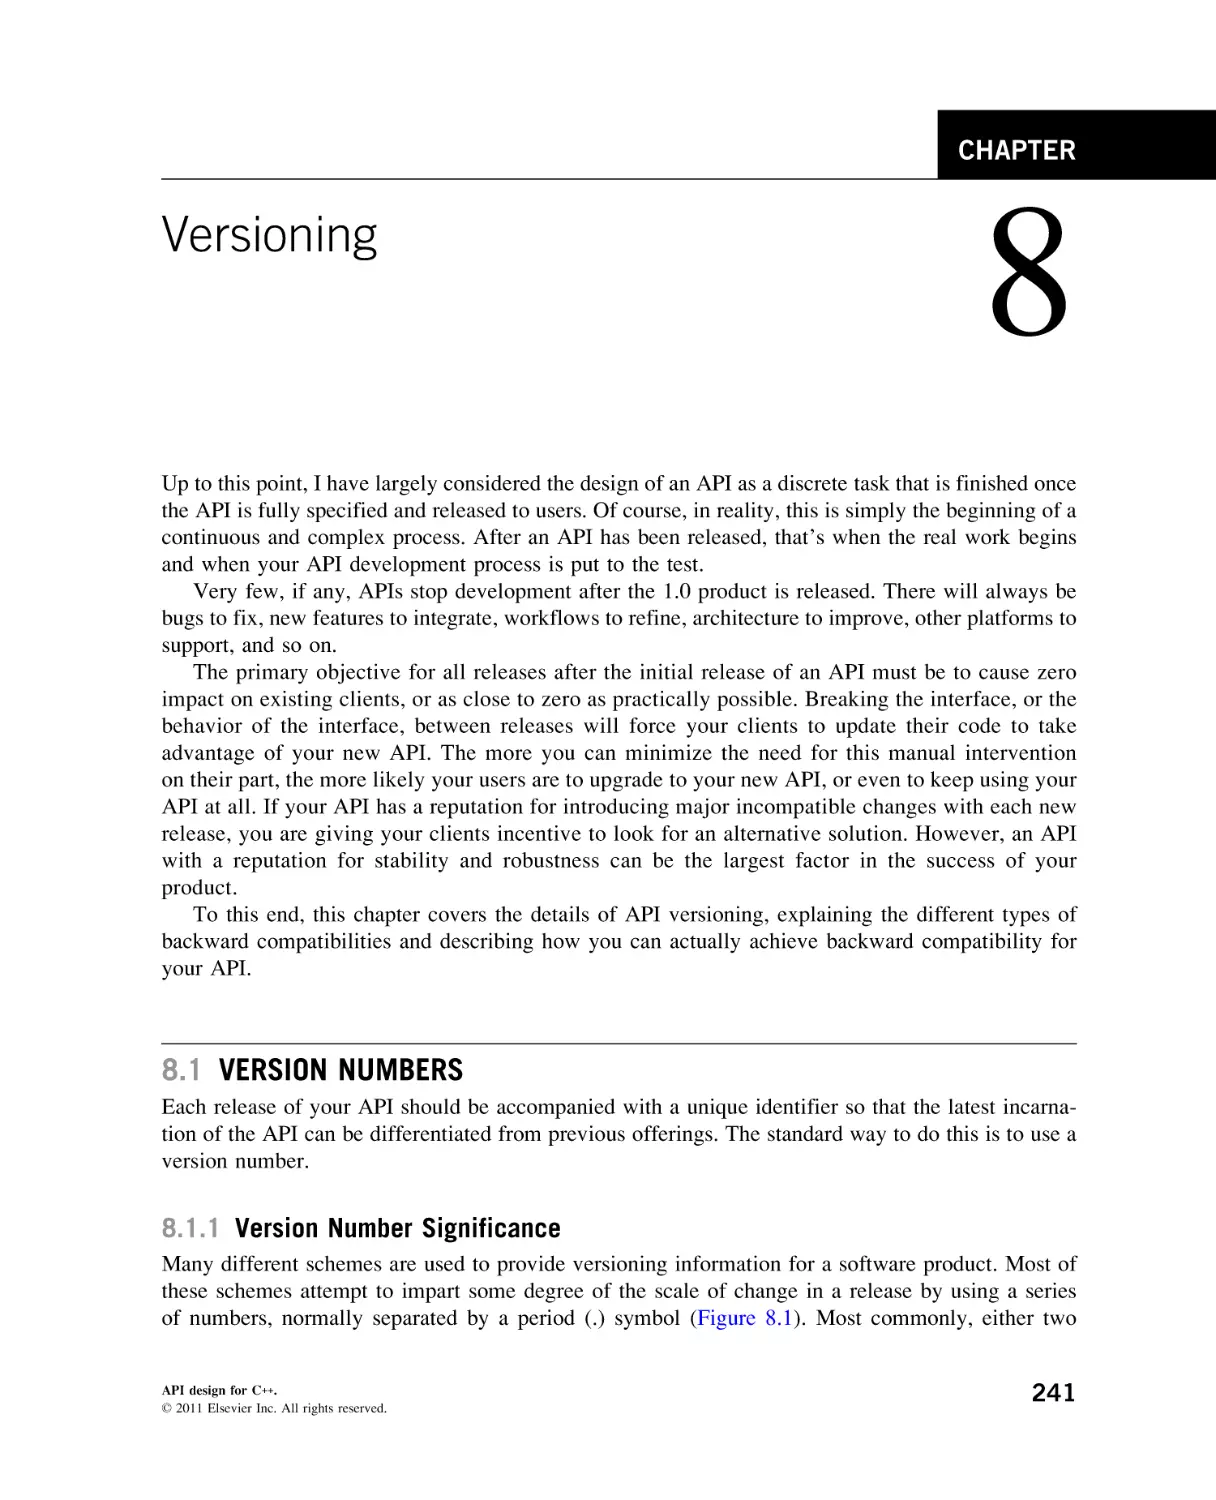 Versioning
Version Numbers
Version Number Significance